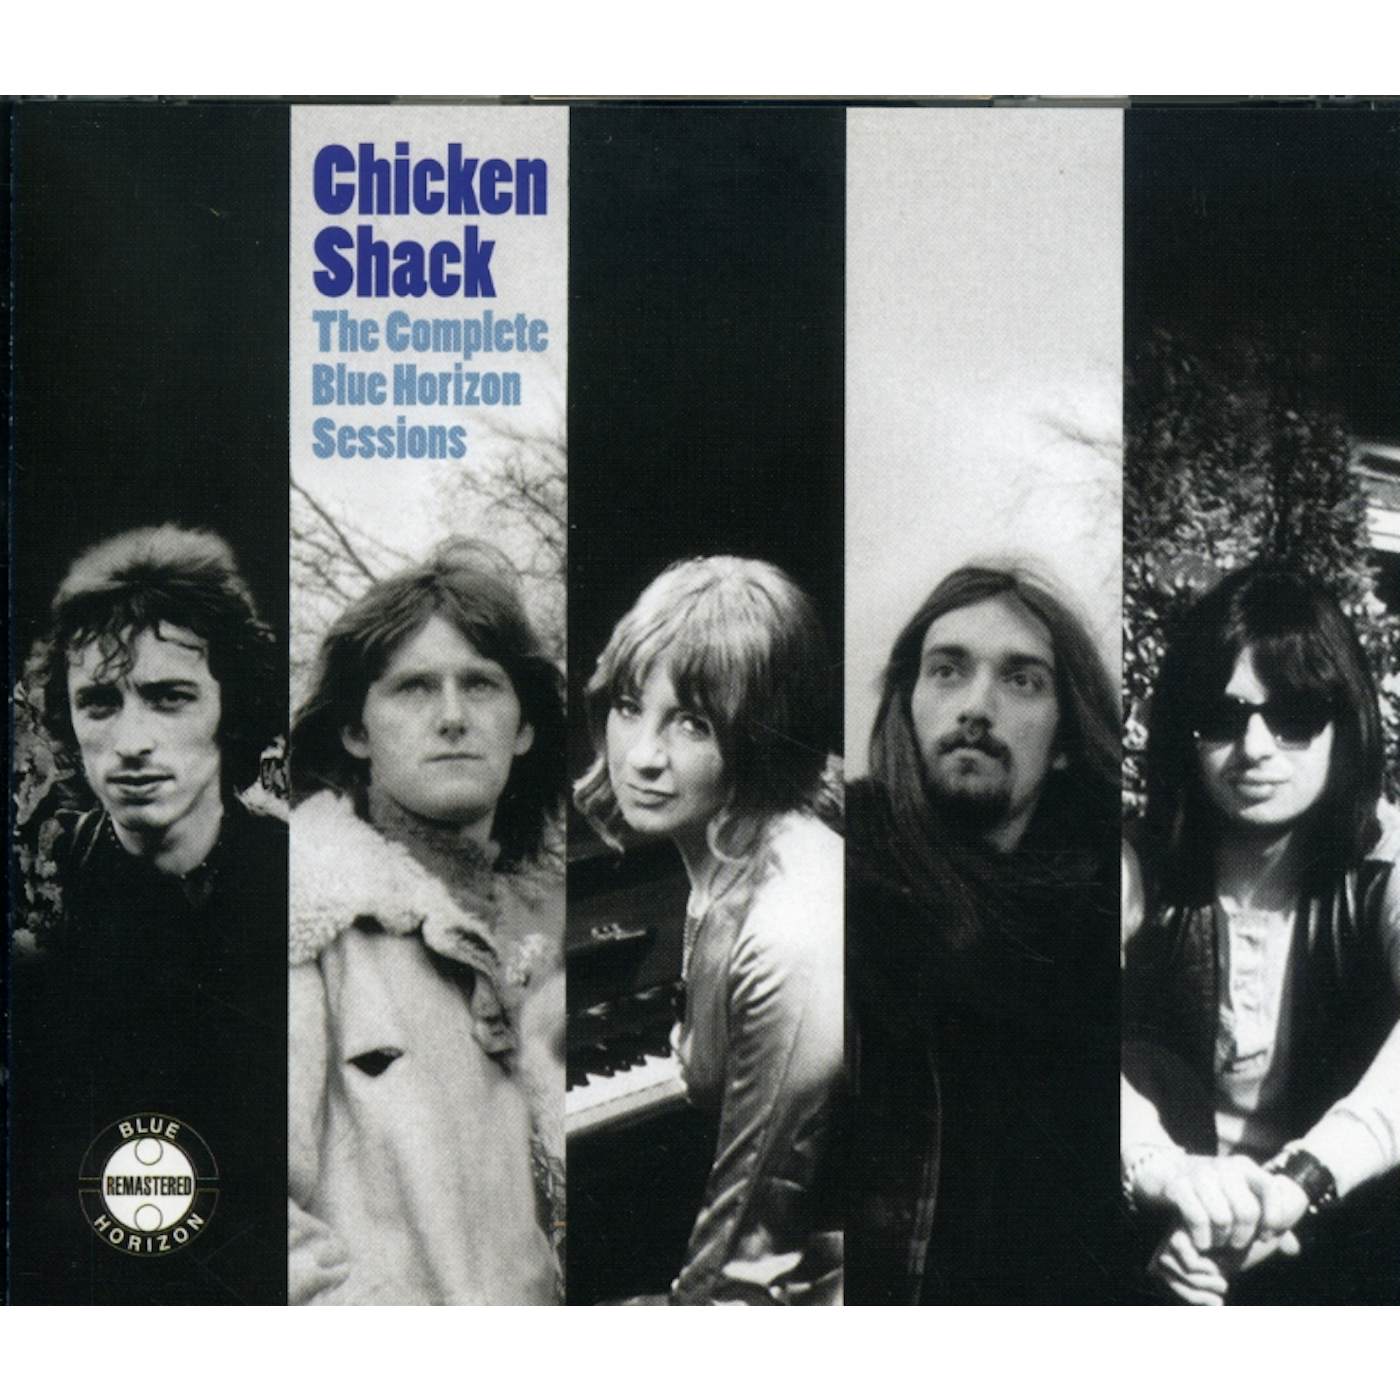 Chicken Shack COMPLETE BLUE HORIZON SESSIONS CD